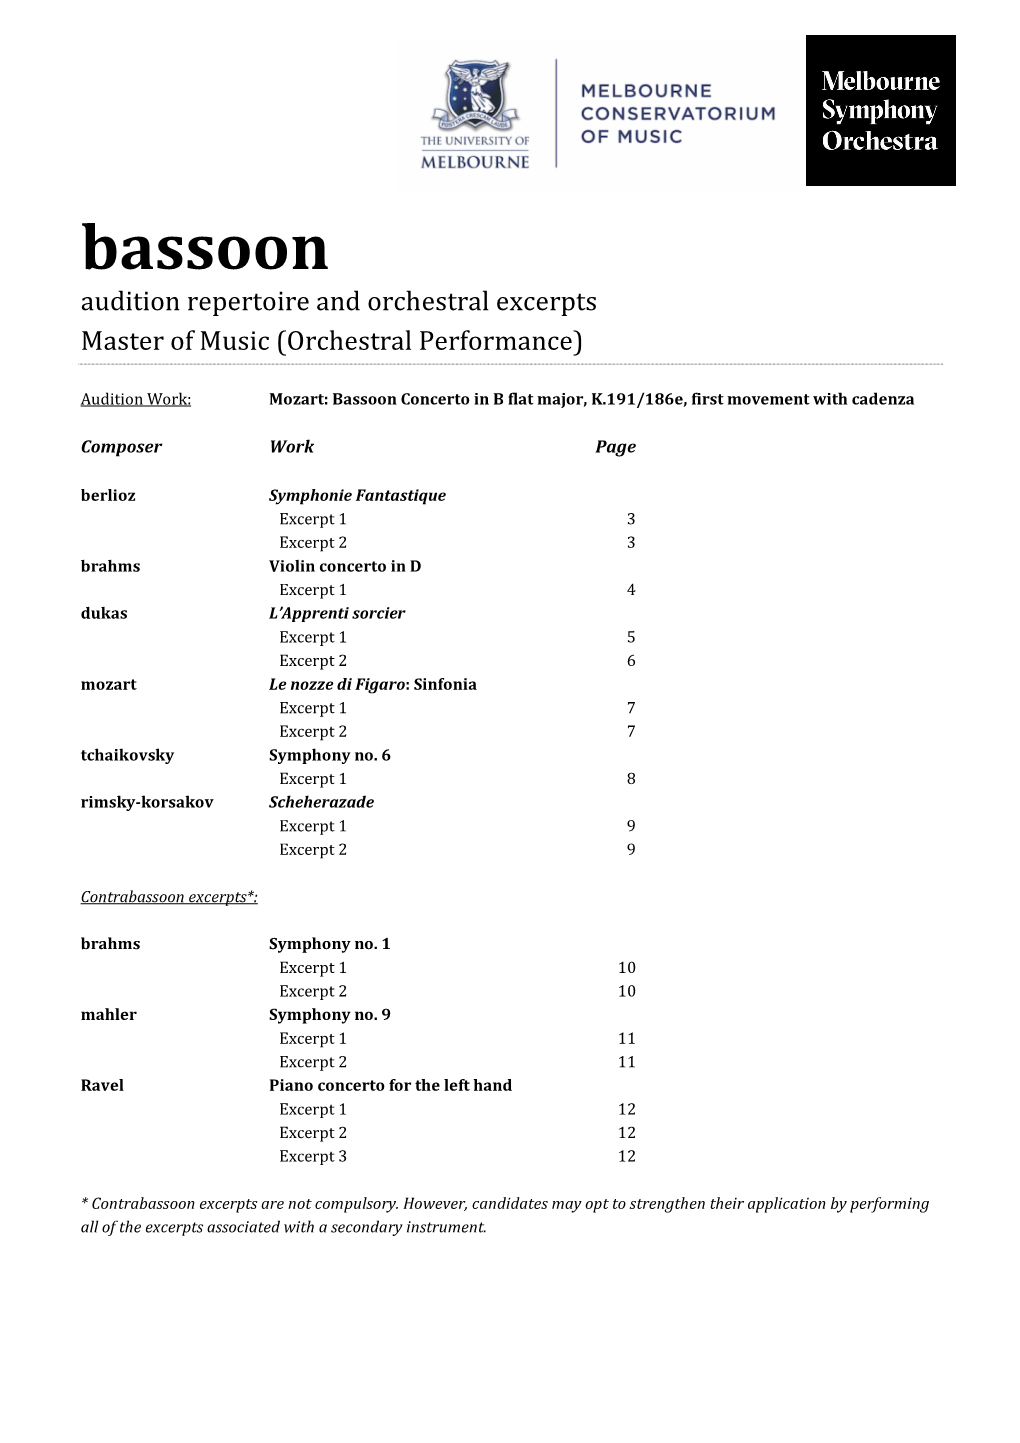 Bassoon Audition Repertoire and Orchestral Excerpts Master of Music (Orchestral Performance)